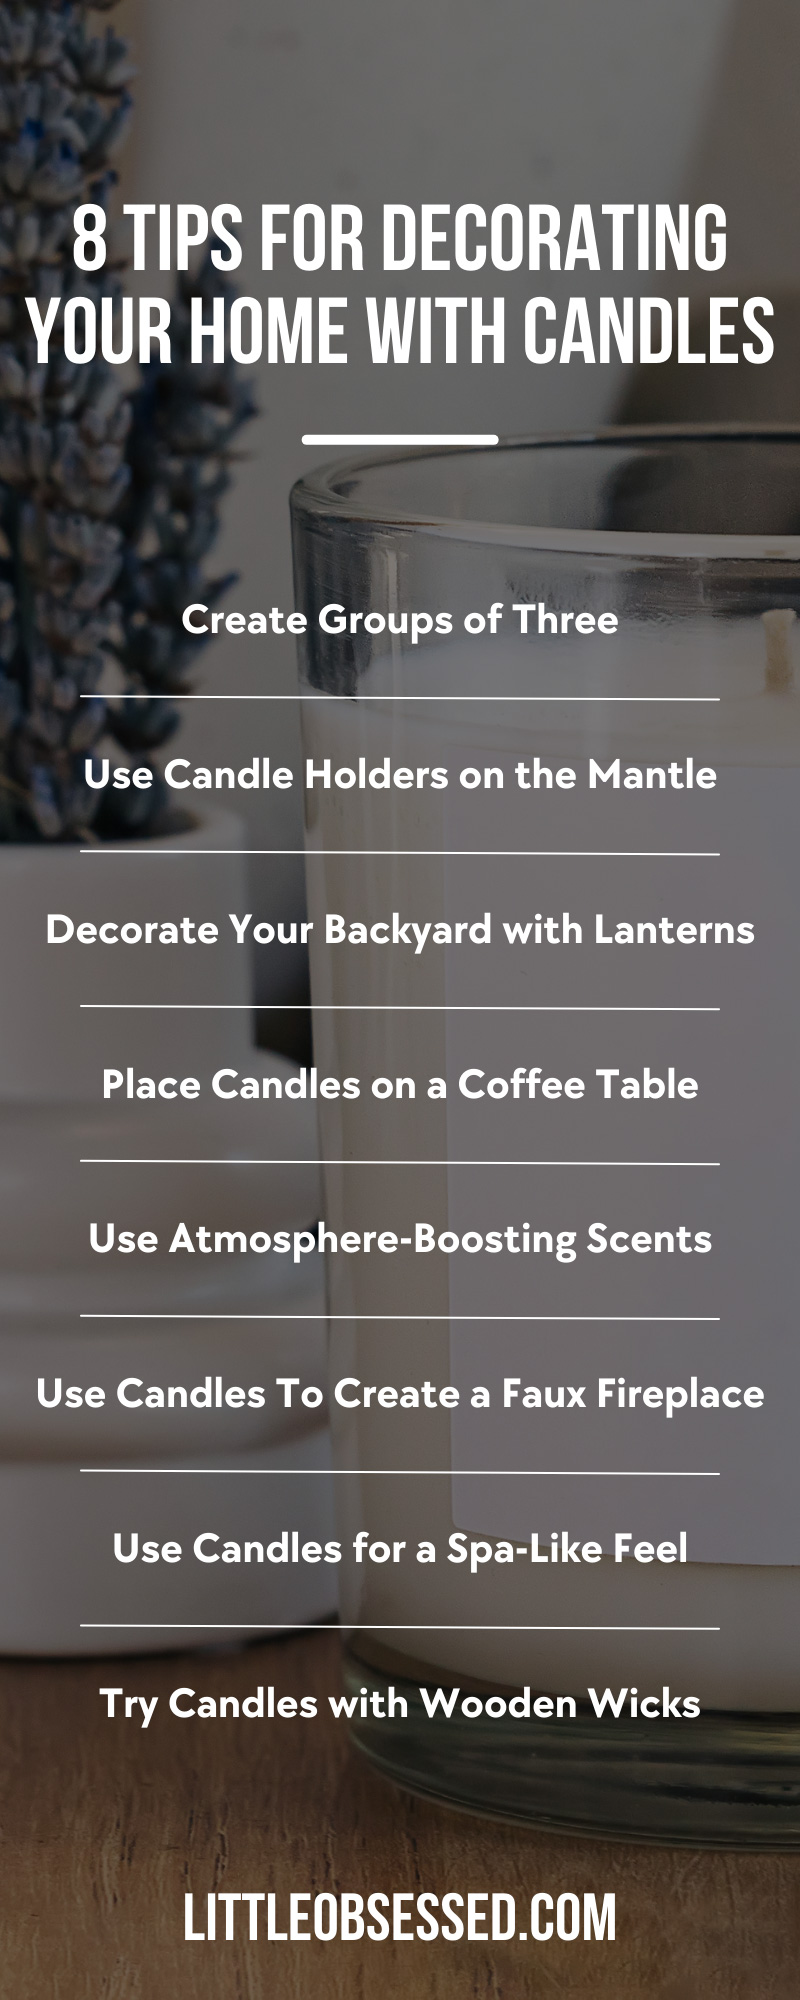 8 Tips for Decorating Your Home With Candles